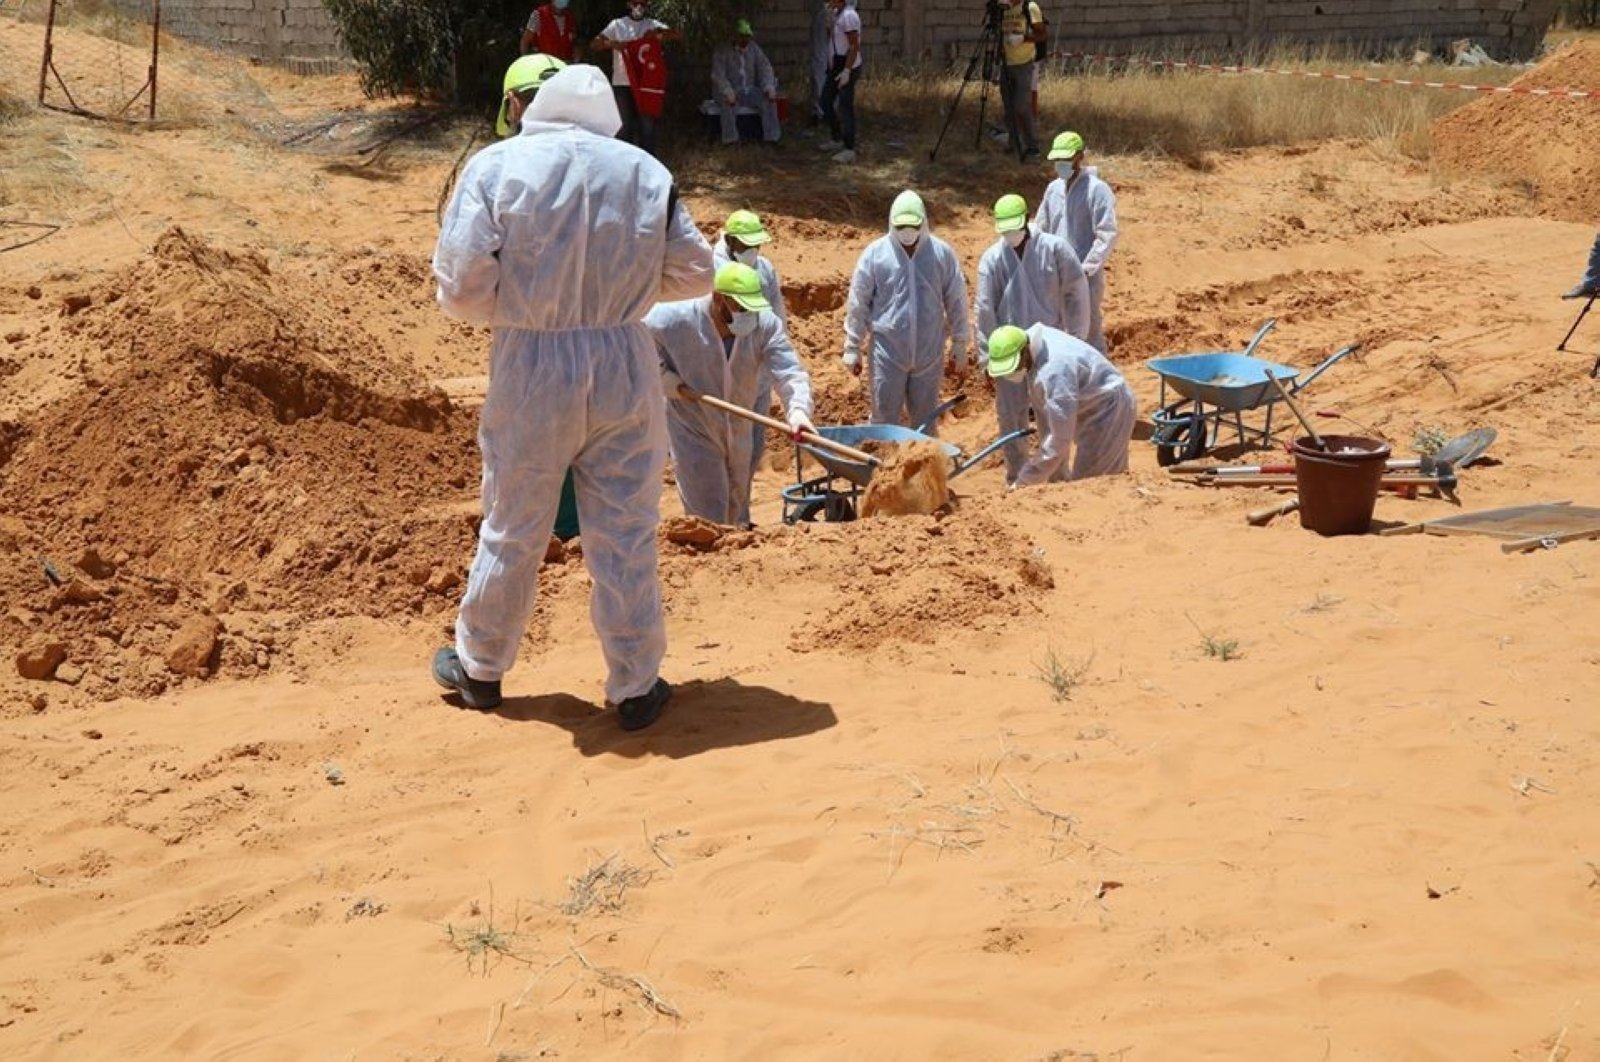 Mass graves have been found in areas liberated by Haftar forces in Libya. (İHA Photo)